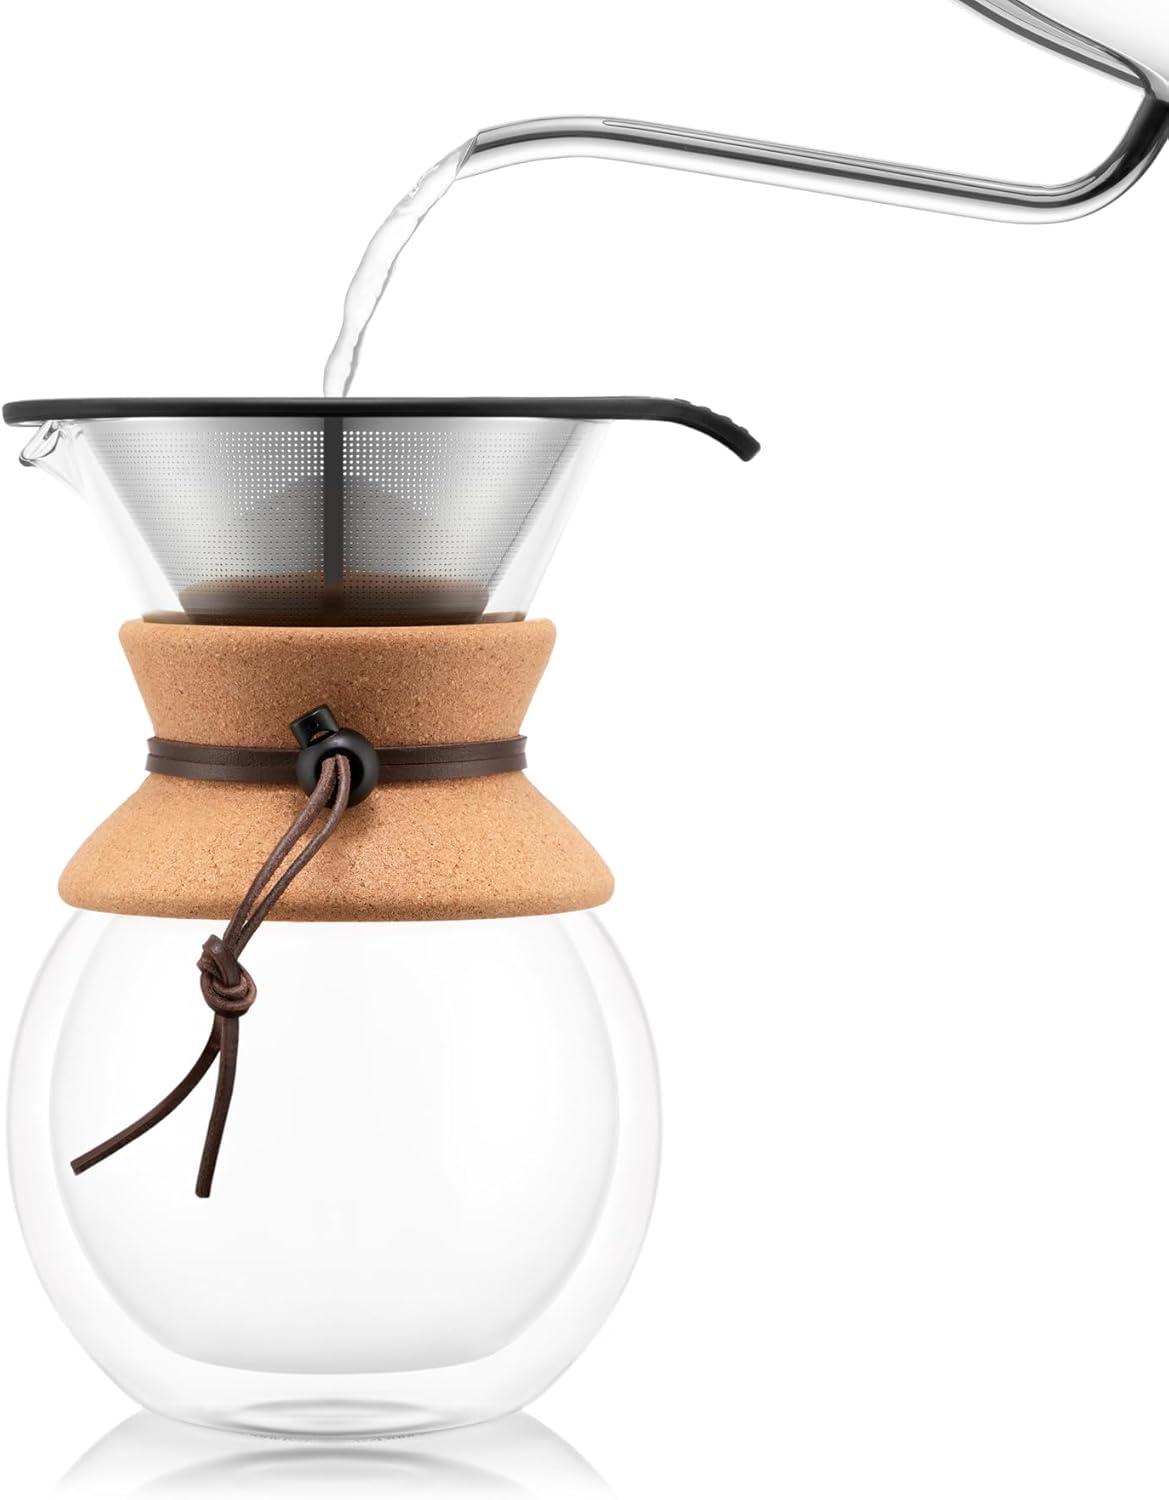 33.81oz Stainless Steel Pour Over Coffee Maker with Glass Carafe